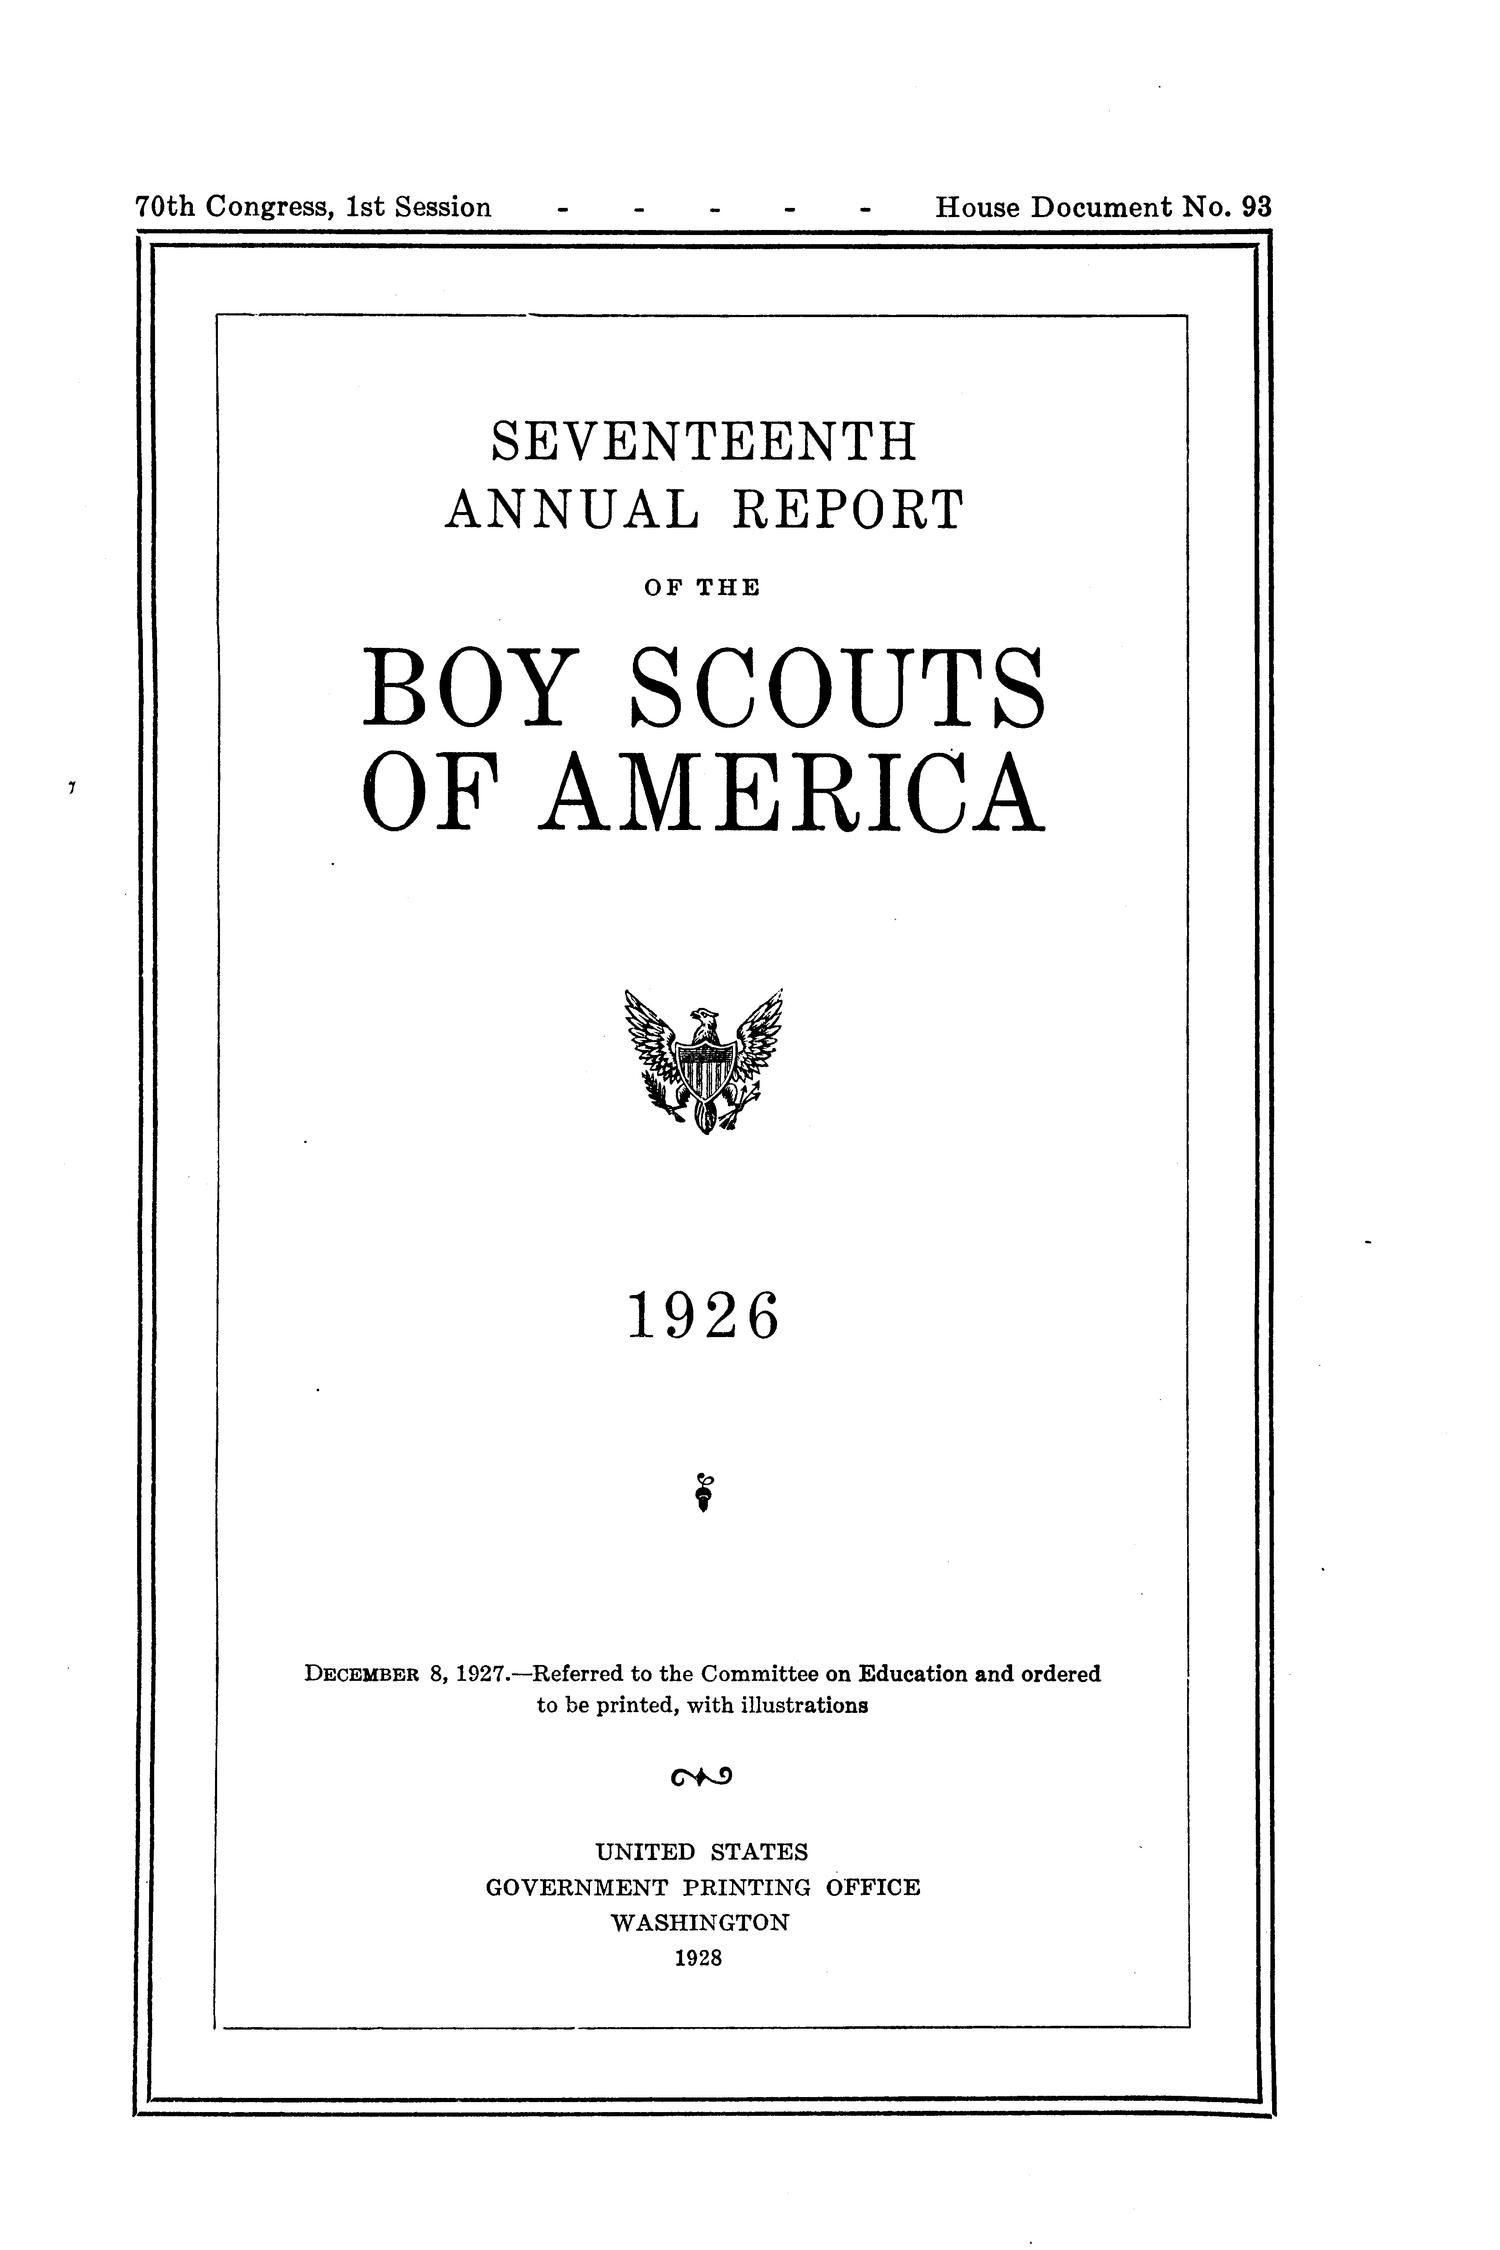 annual-report-of-the-boy-scouts-of-america-1926-page-i-the-portal